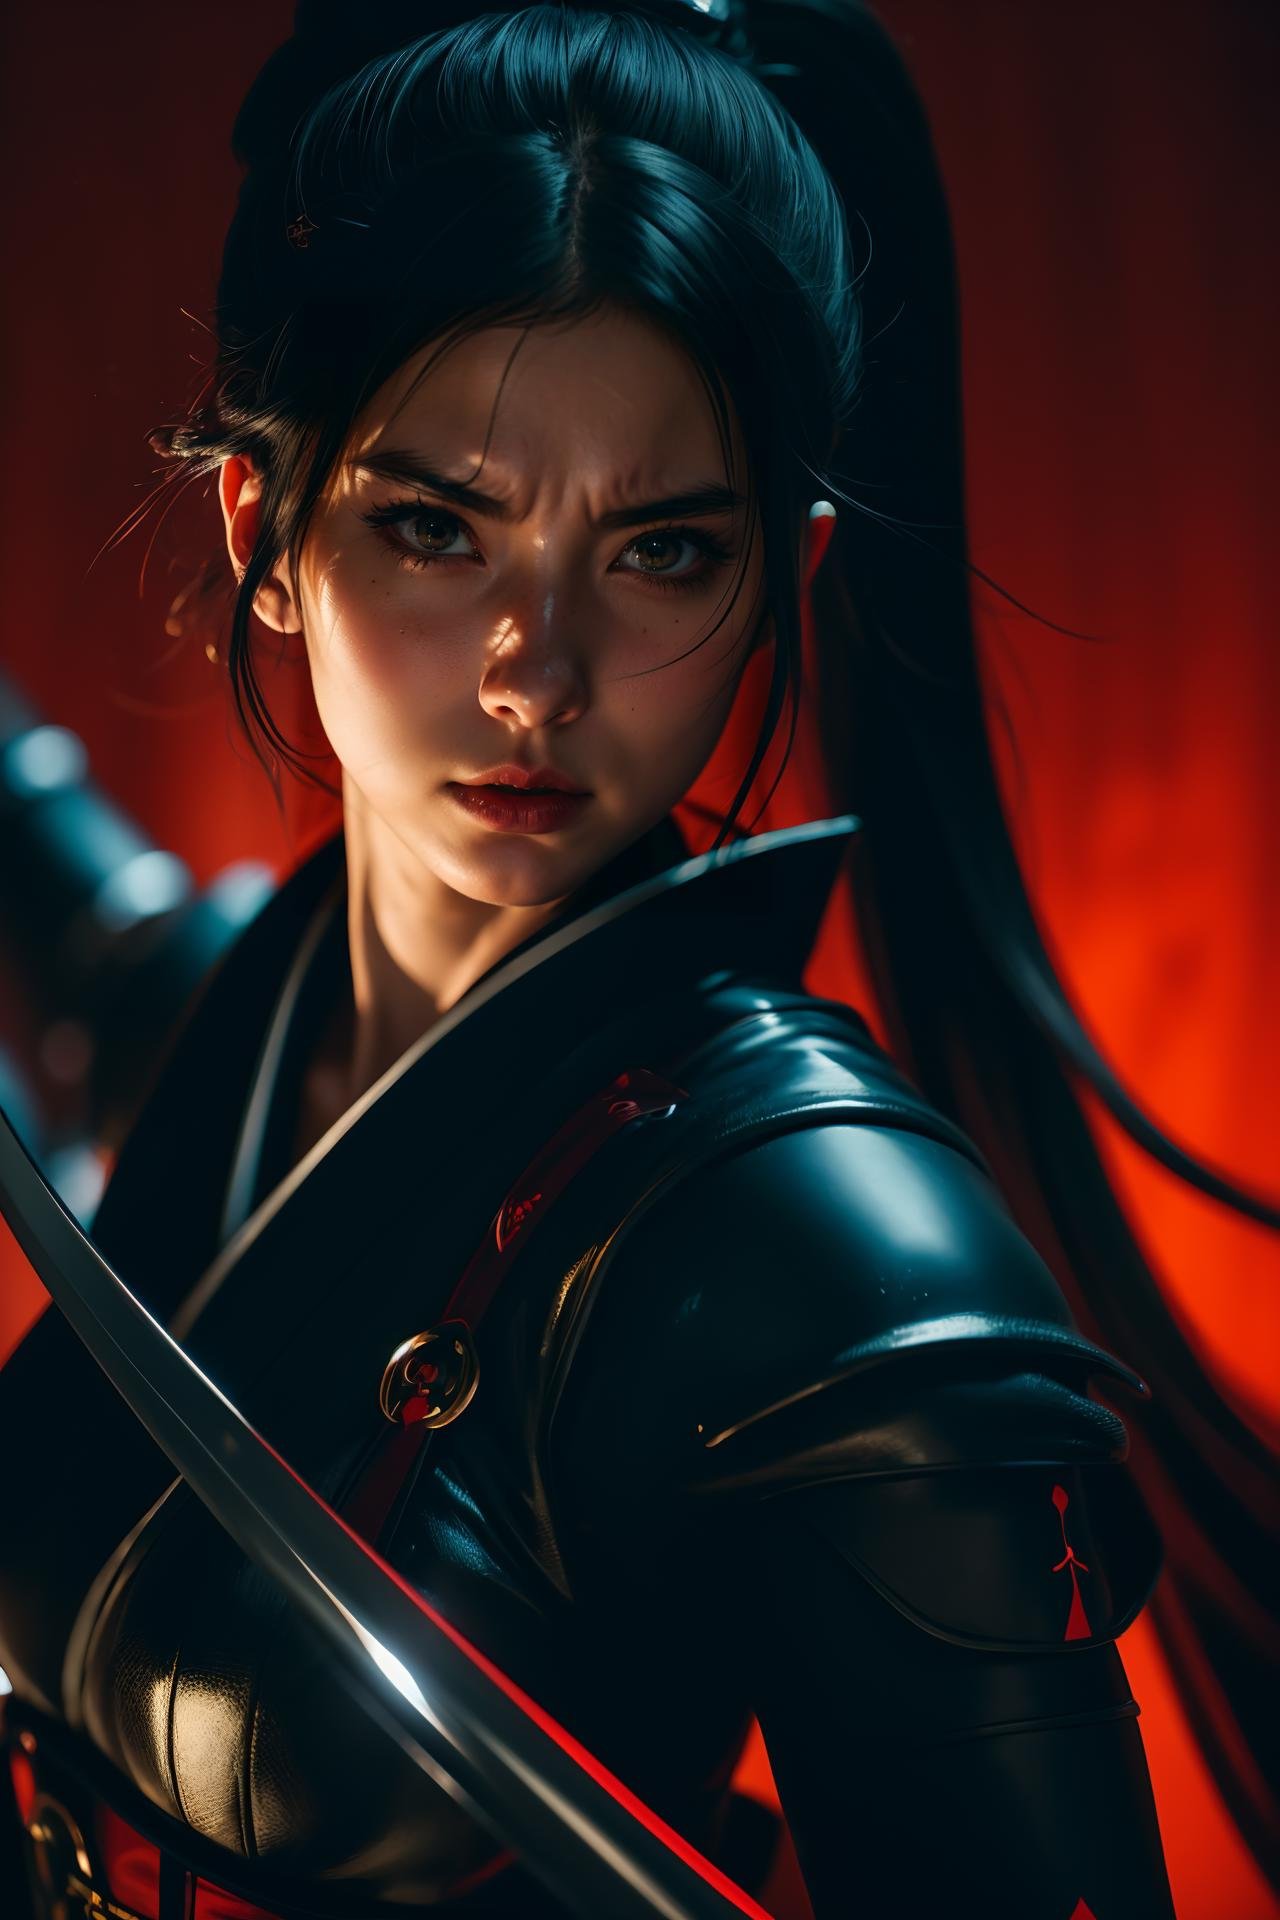 an anime-like character, an anime woman, wearing a traditional costume, ponytail, black armor, holding a long sword, chaotic twisting, in the style of unreal engine 5, realism, in the style of ink painting, wendy froude, mio hirano, epic, red and black, color confusion, exaggerated close-up intensity, close-up intensity, kozo yokai, caravaggesque chiaroscuro